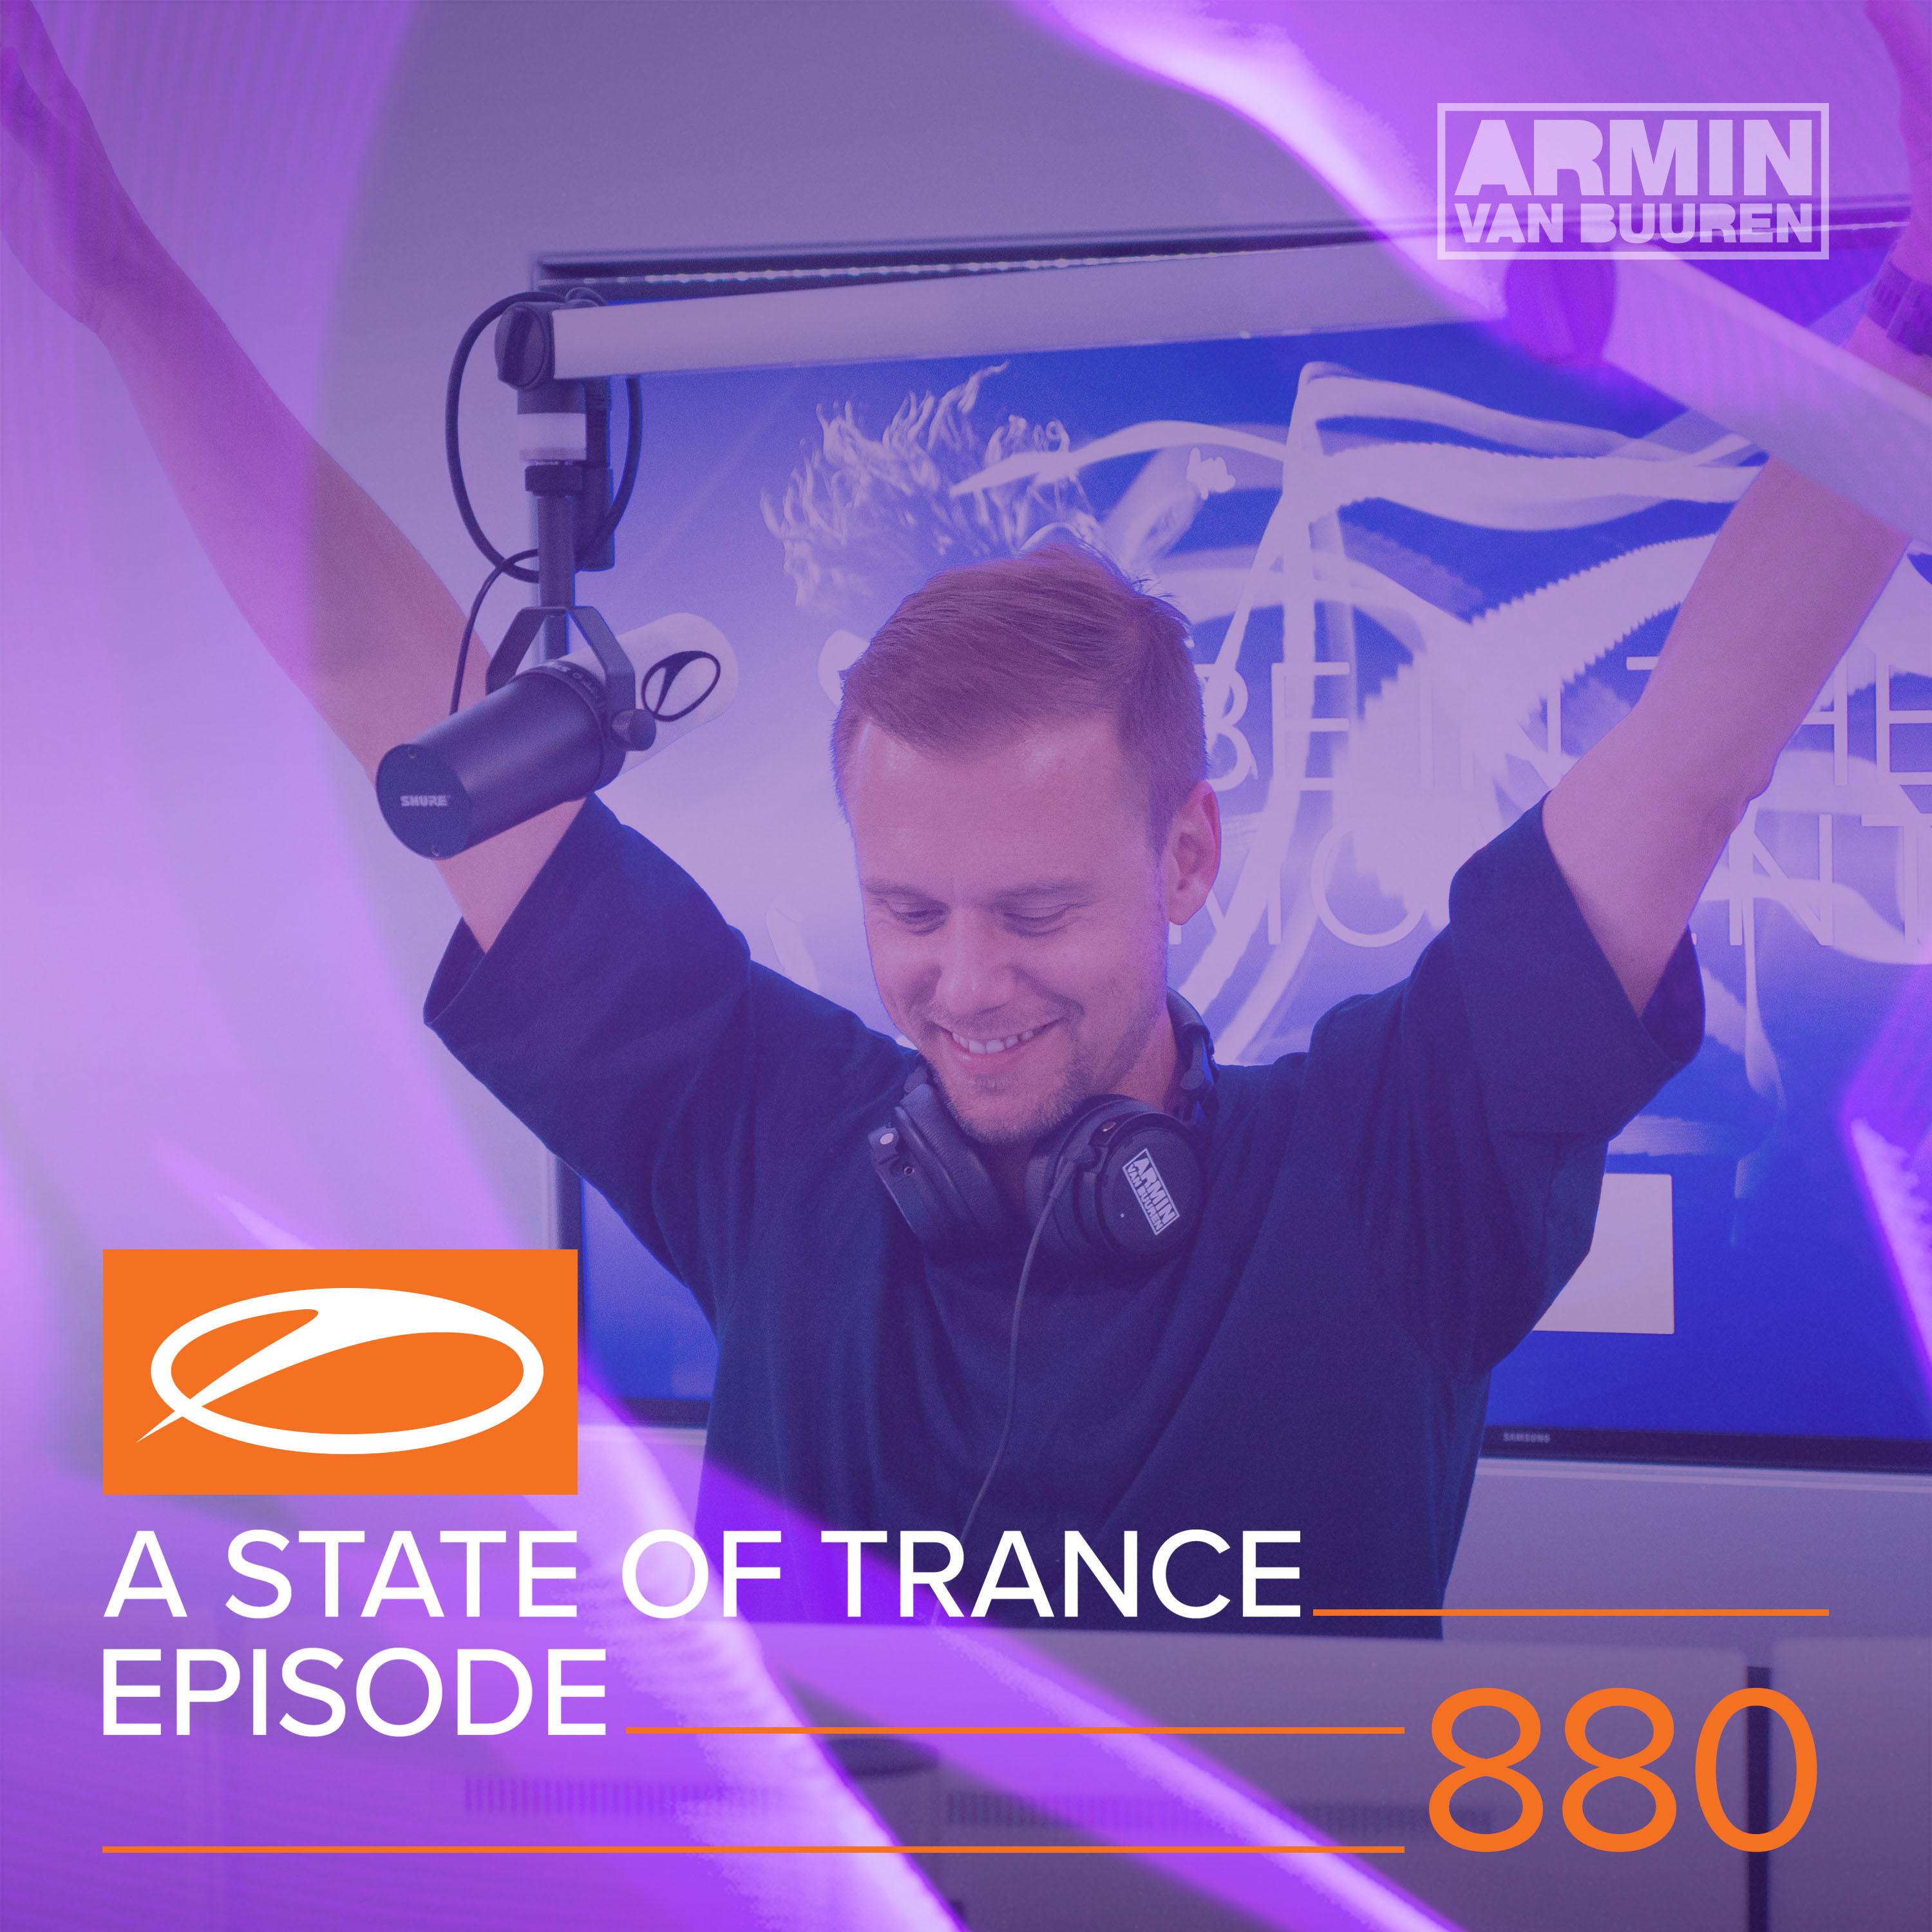 A State Of Trance (ASOT 880) (Win A Golden Ticket to the ASOT ADE Event)